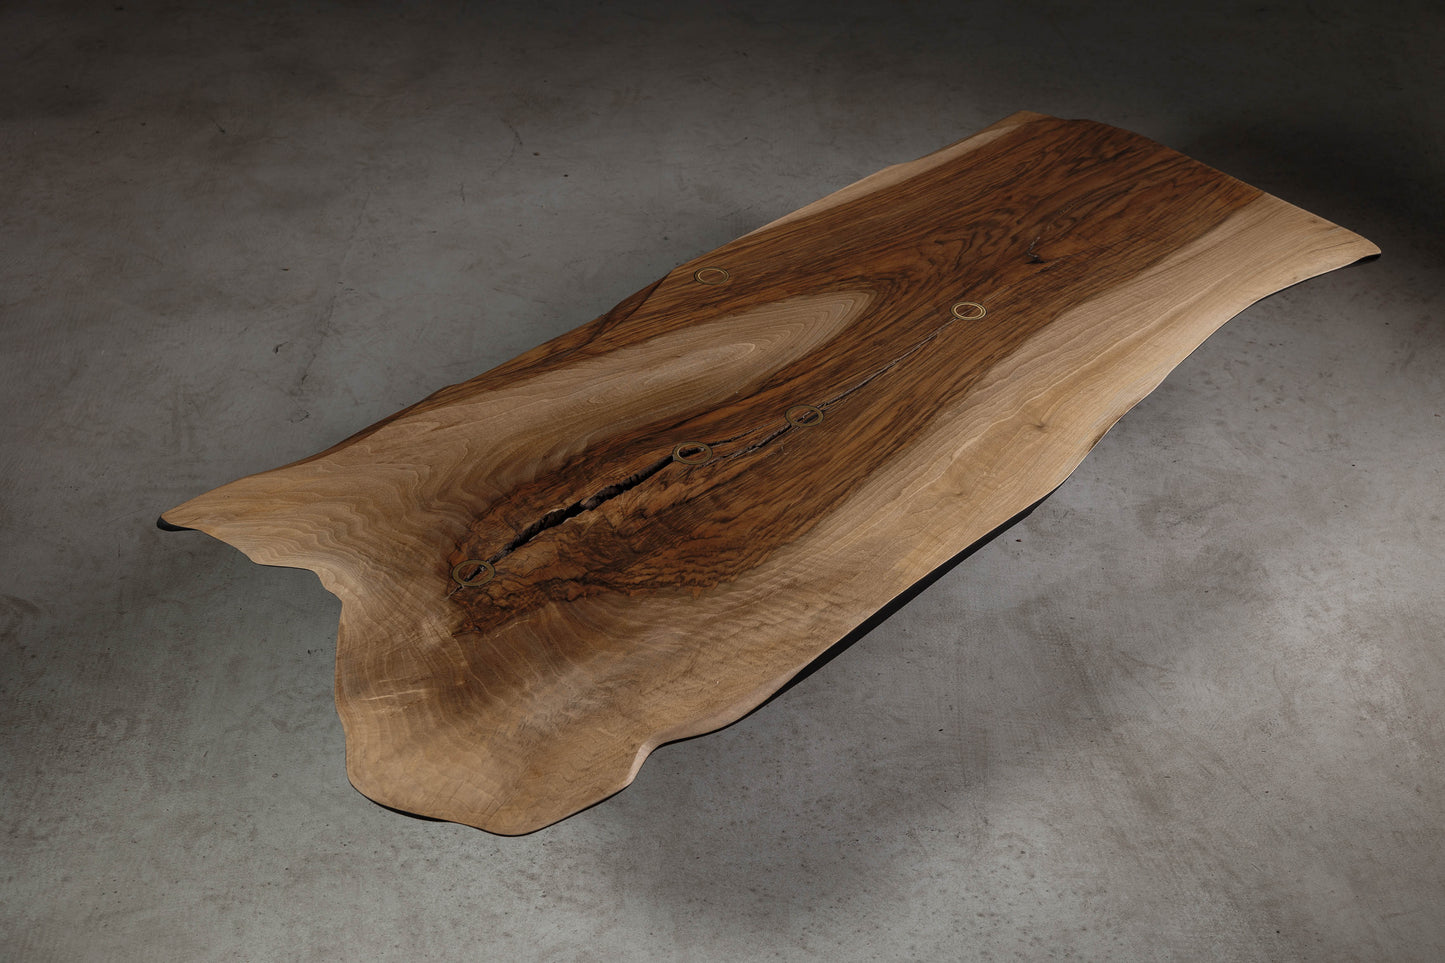 Modern Organic Walnut Coffee Table EM109 Part Of 18Brut Collection | Angled shot showing the shape of the walnut slab.